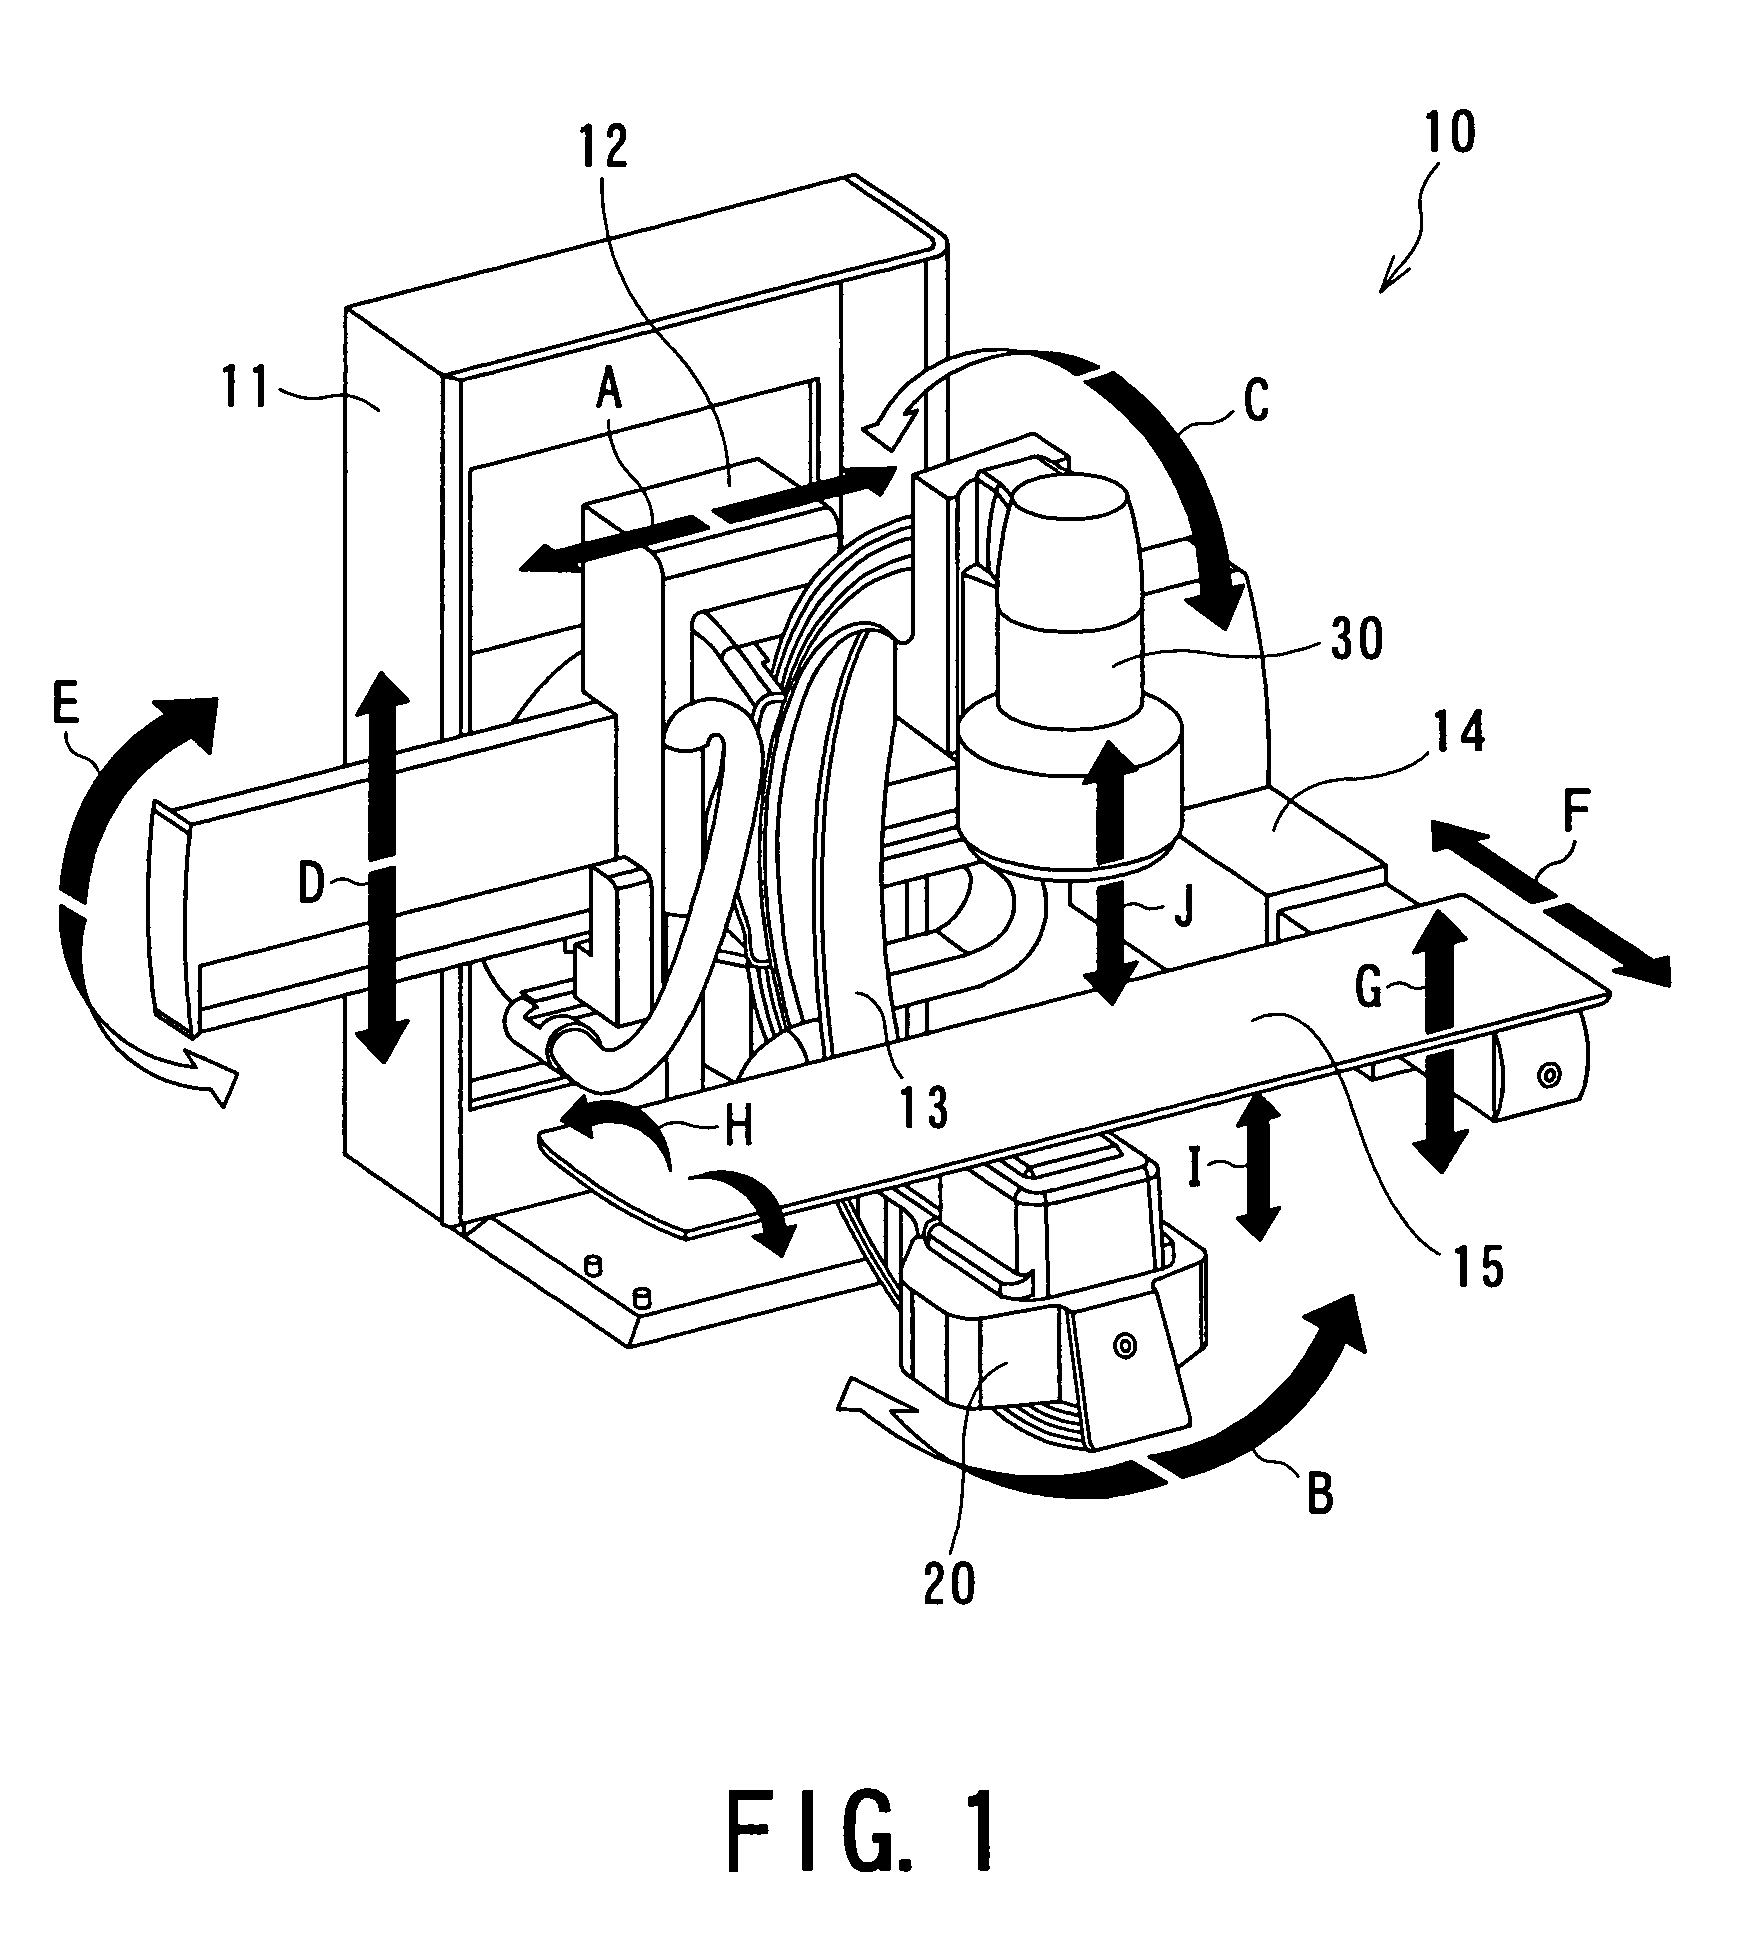 Method and system for X-ray diagnosis of object in which X-ray contrast agent is injected